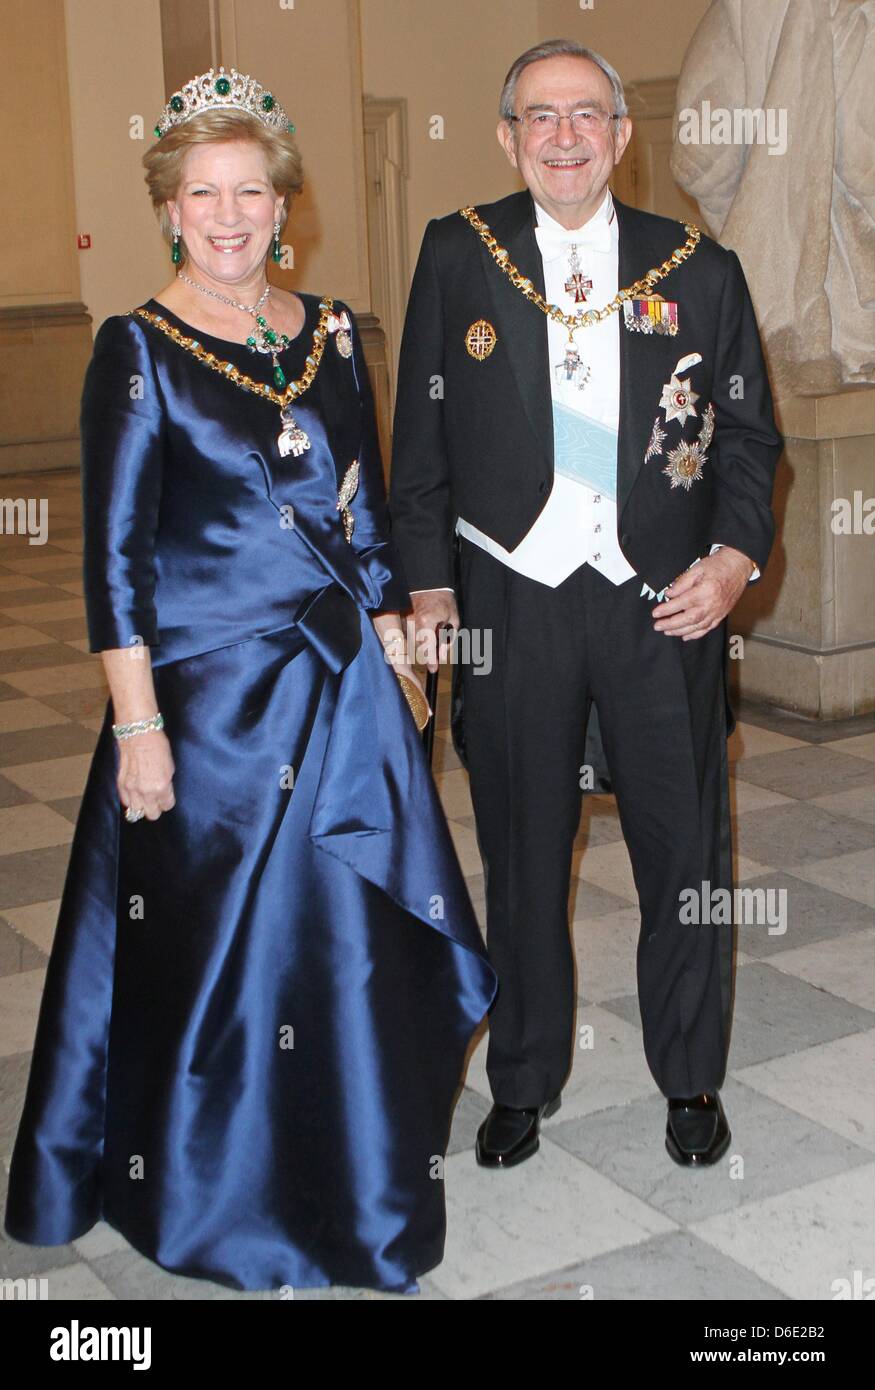 former-king-constantine-ii-of-greece-his-wife-anne-marie-arrive-for-D6E2B2.jpg